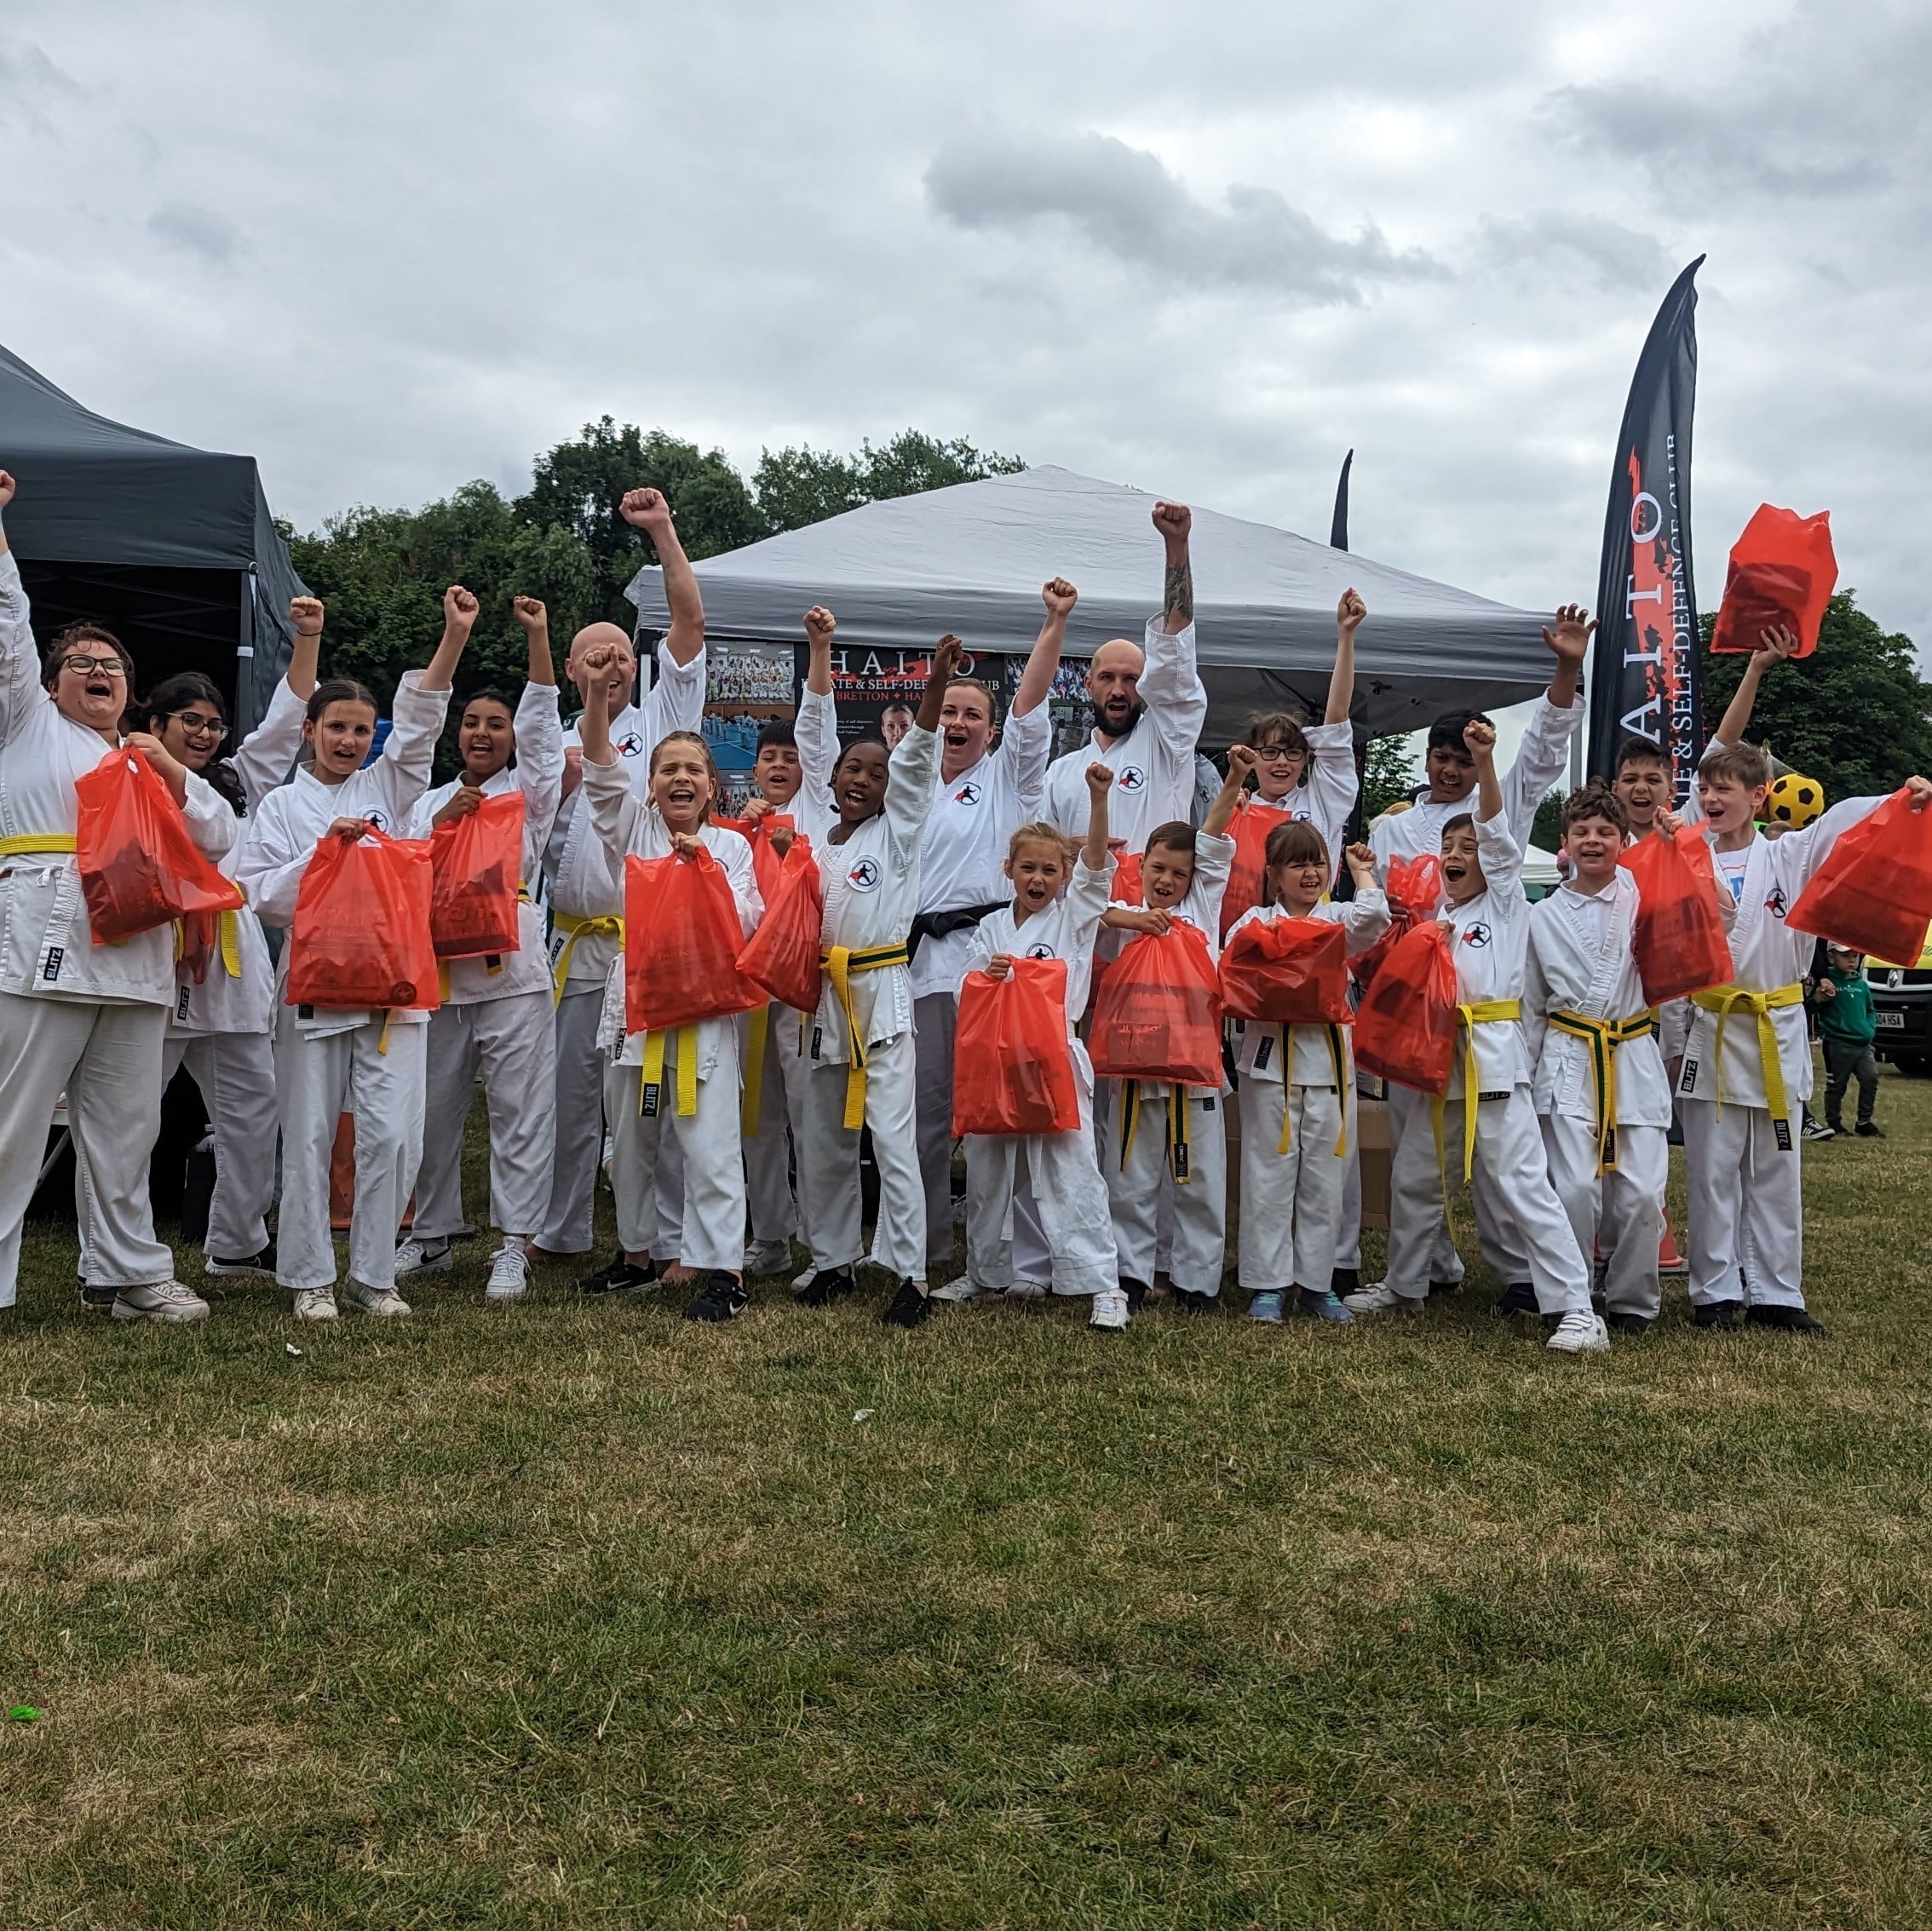 Bretton Community Festival A Display of Karate Excellence